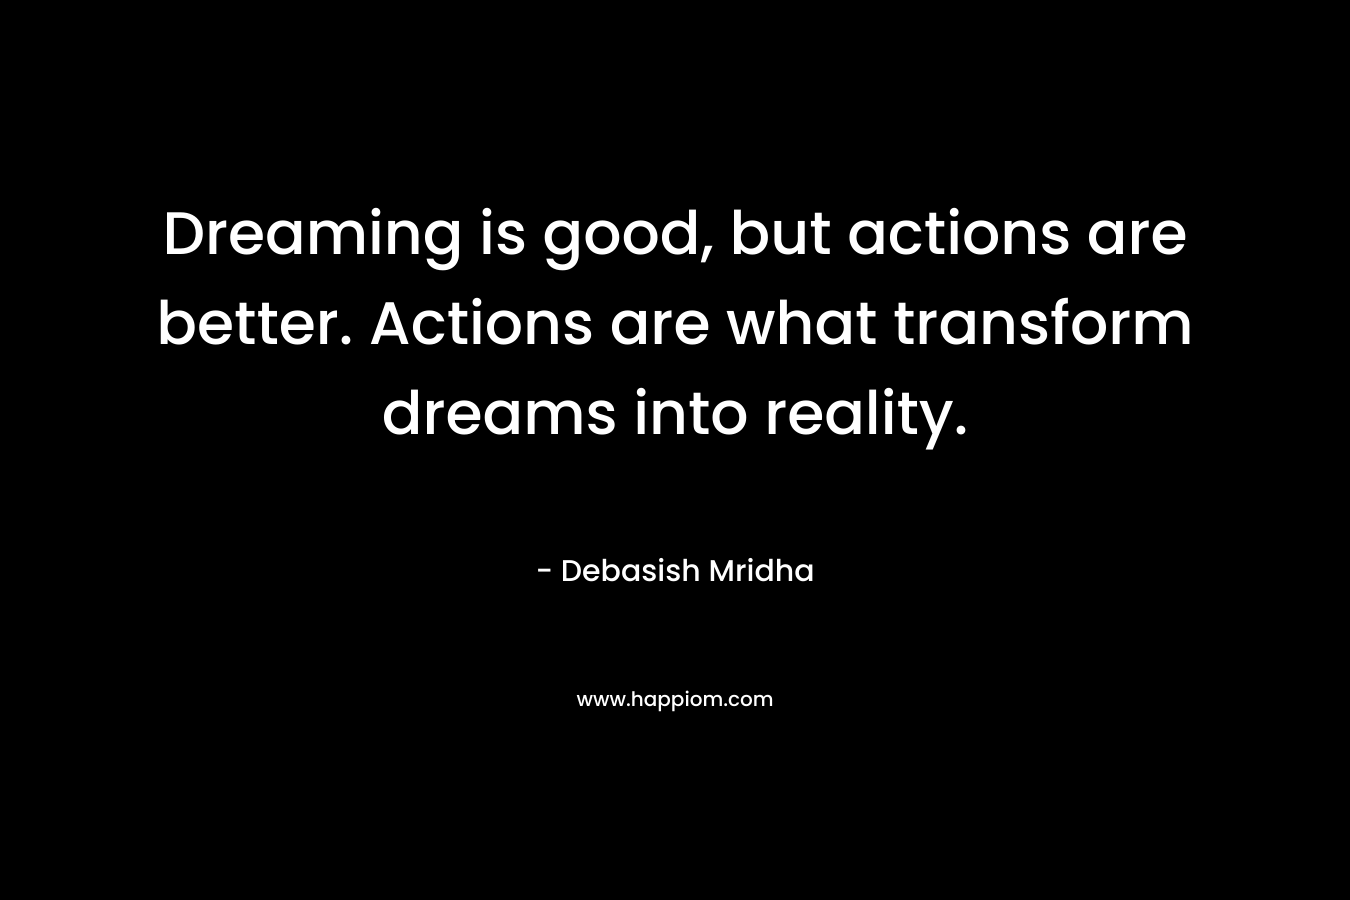 Dreaming is good, but actions are better. Actions are what transform dreams into reality.